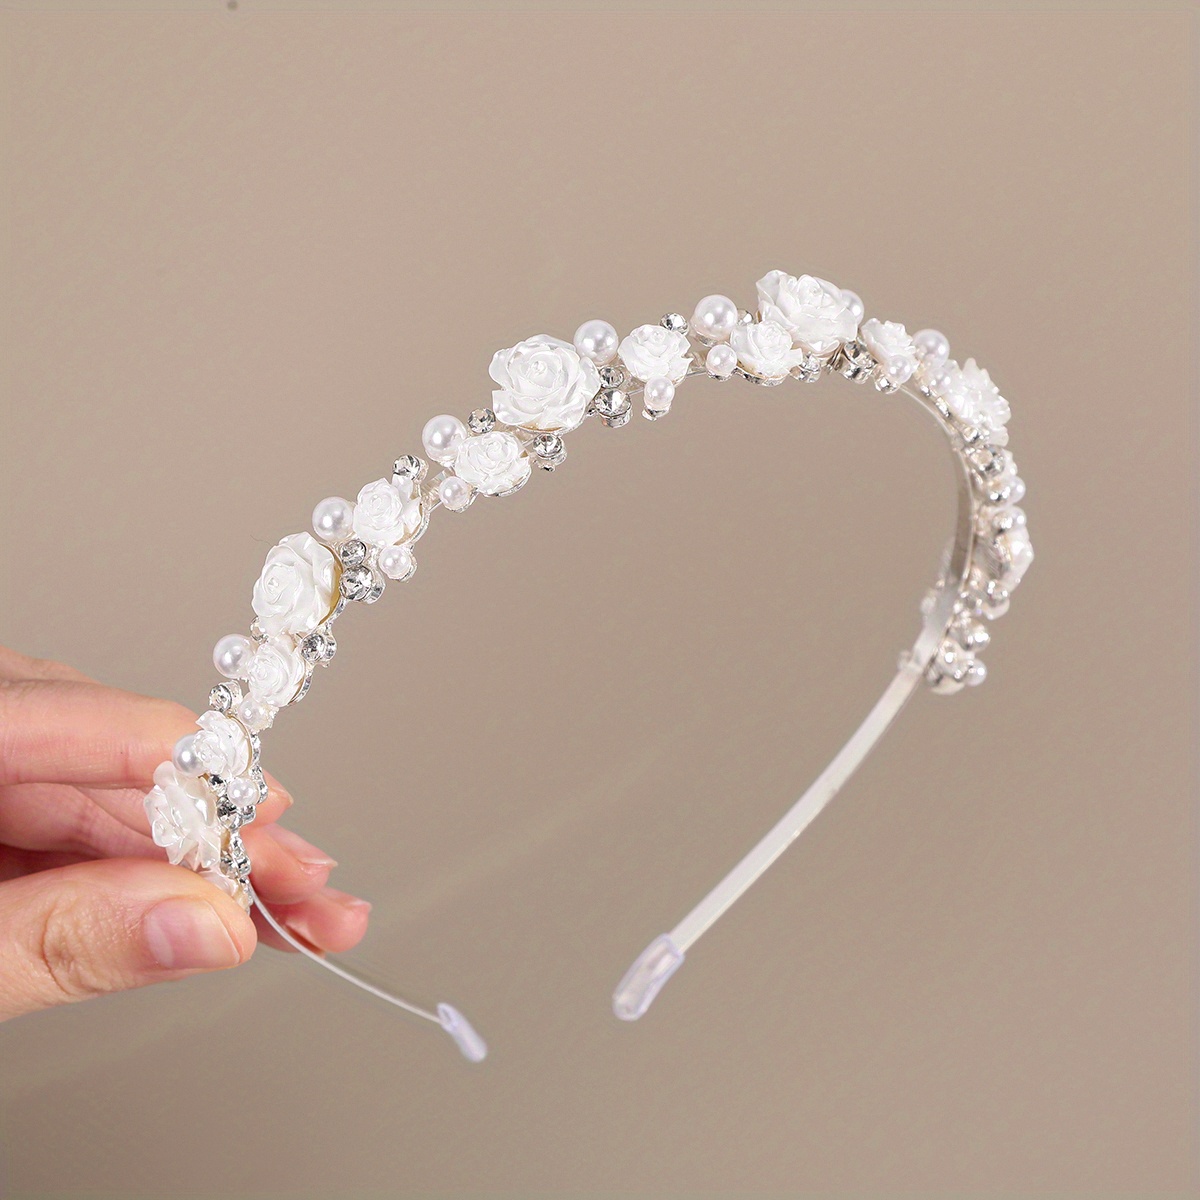 

Elegant Bling Bling Rhinestone Faux Pearl Flower Decorative Head Band Vintage Non Slip Hair Hoop For Women And Daily Use Wedding Banquet Wear